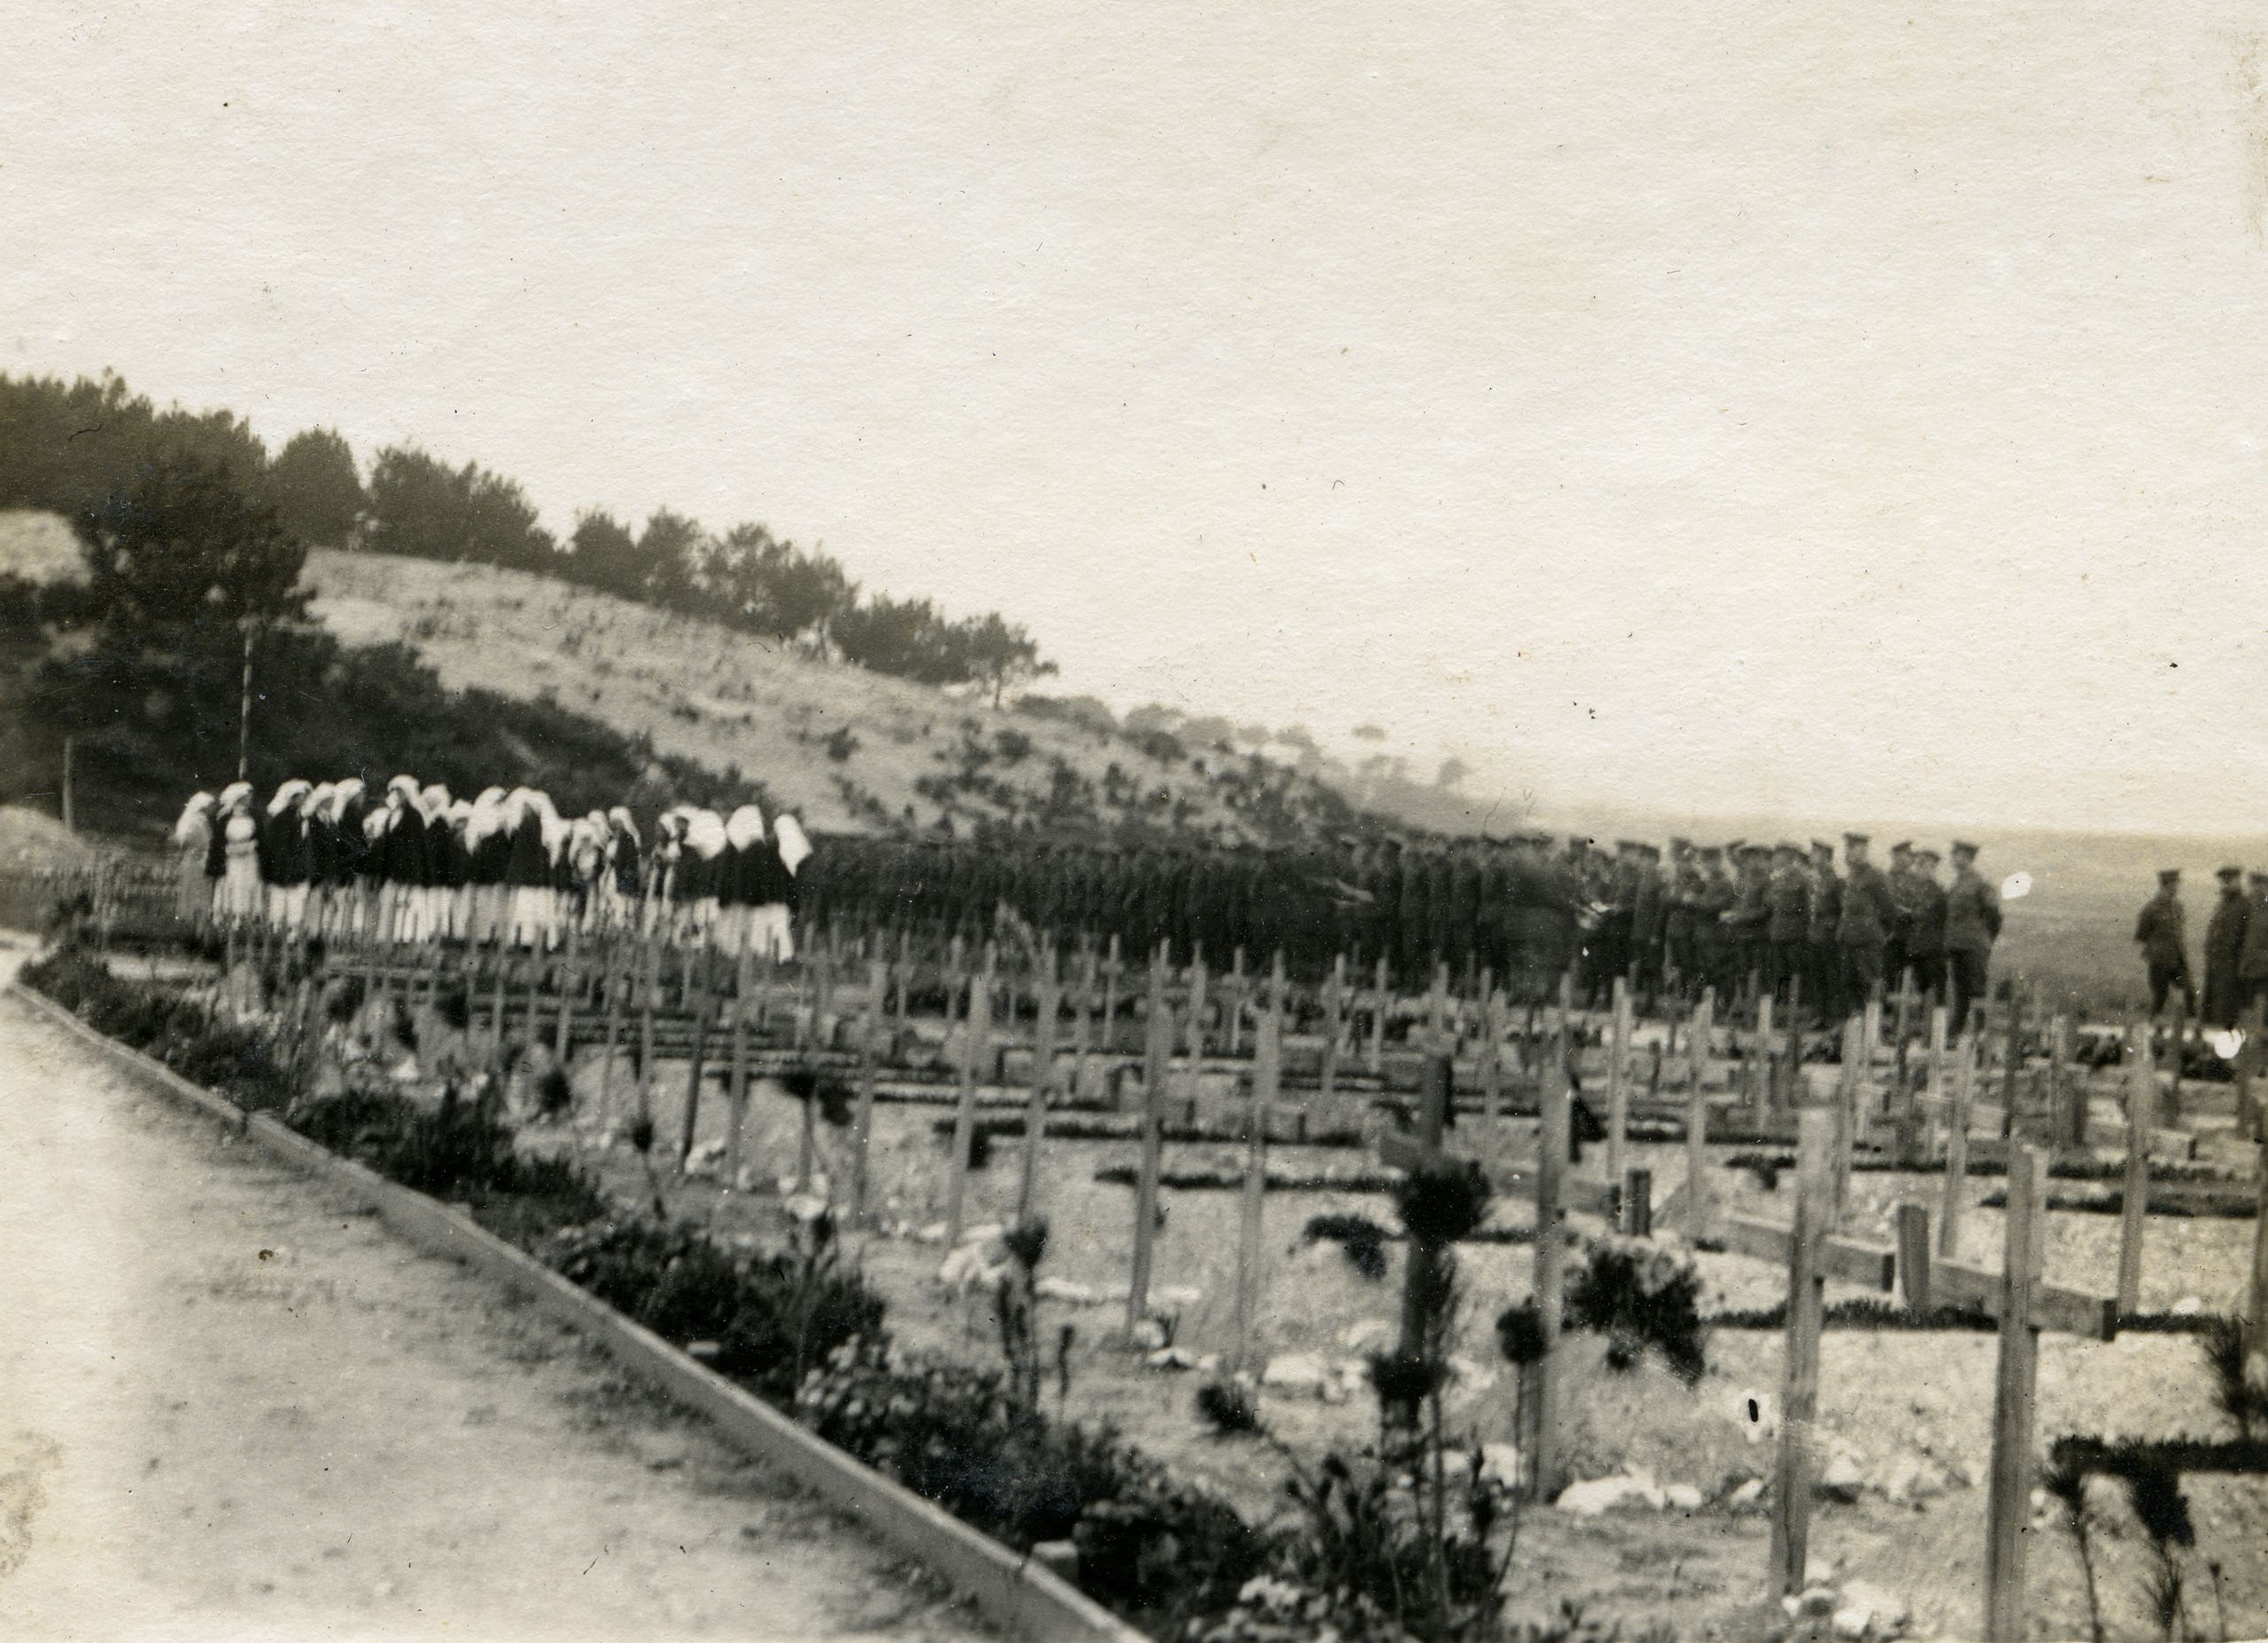 SOMBER OCCASION - Nurses and soldiers gathered for one of the many mass funerals held at the Canadian Field Hospital at Etaples